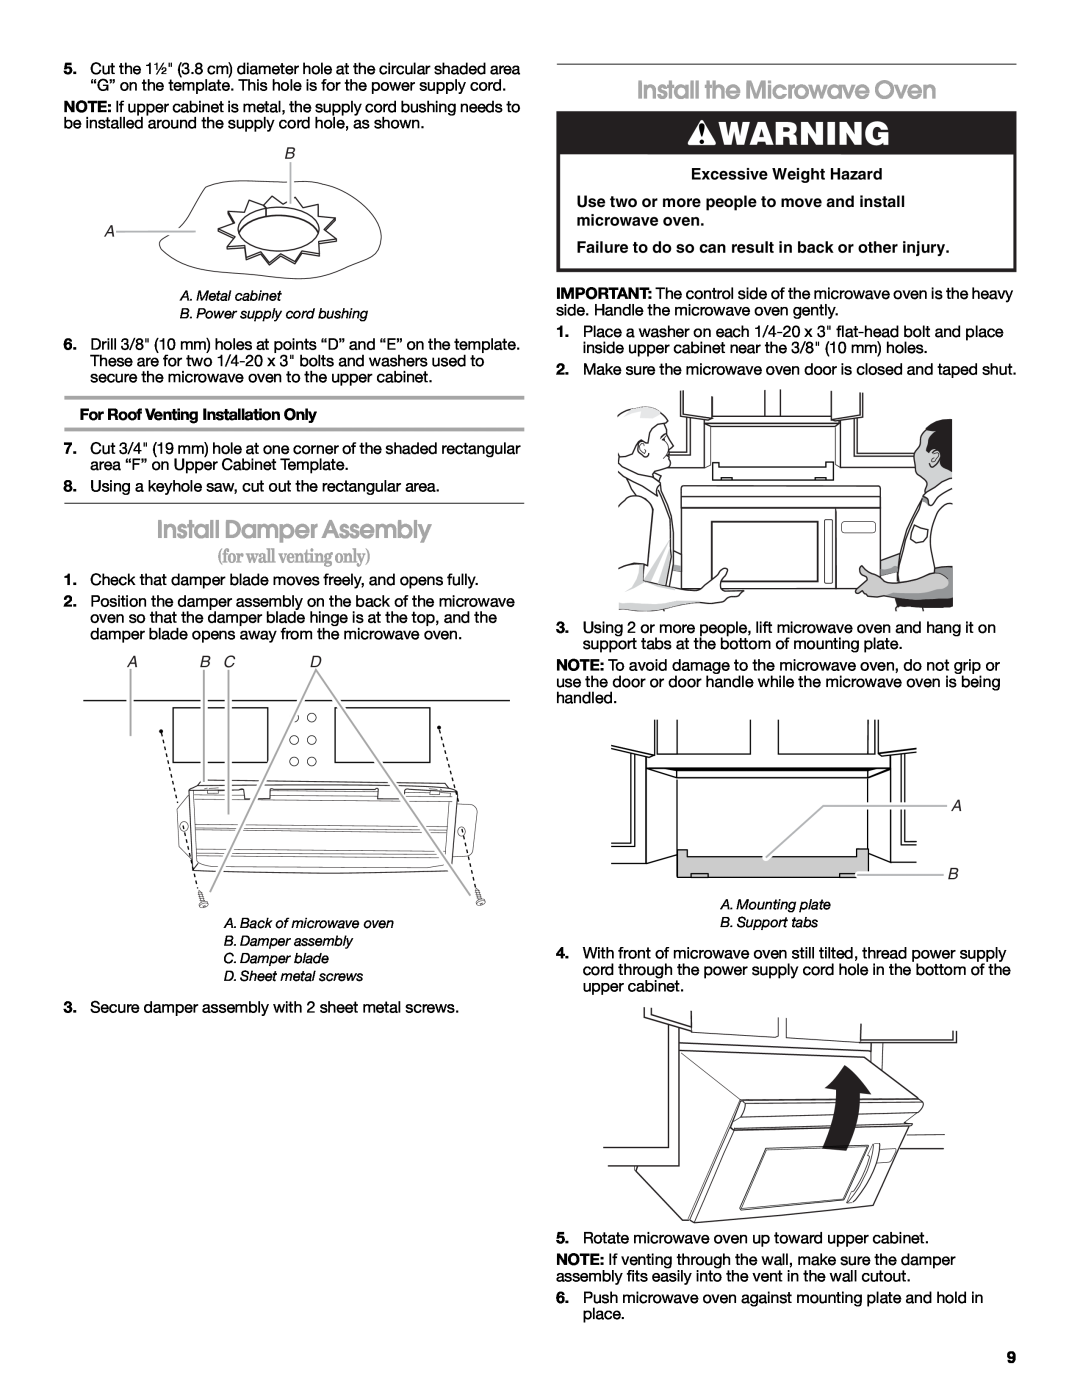 Maytag W10191953A Install Damper Assembly, Install the Microwave Oven, for wall venting only, A B Cd 